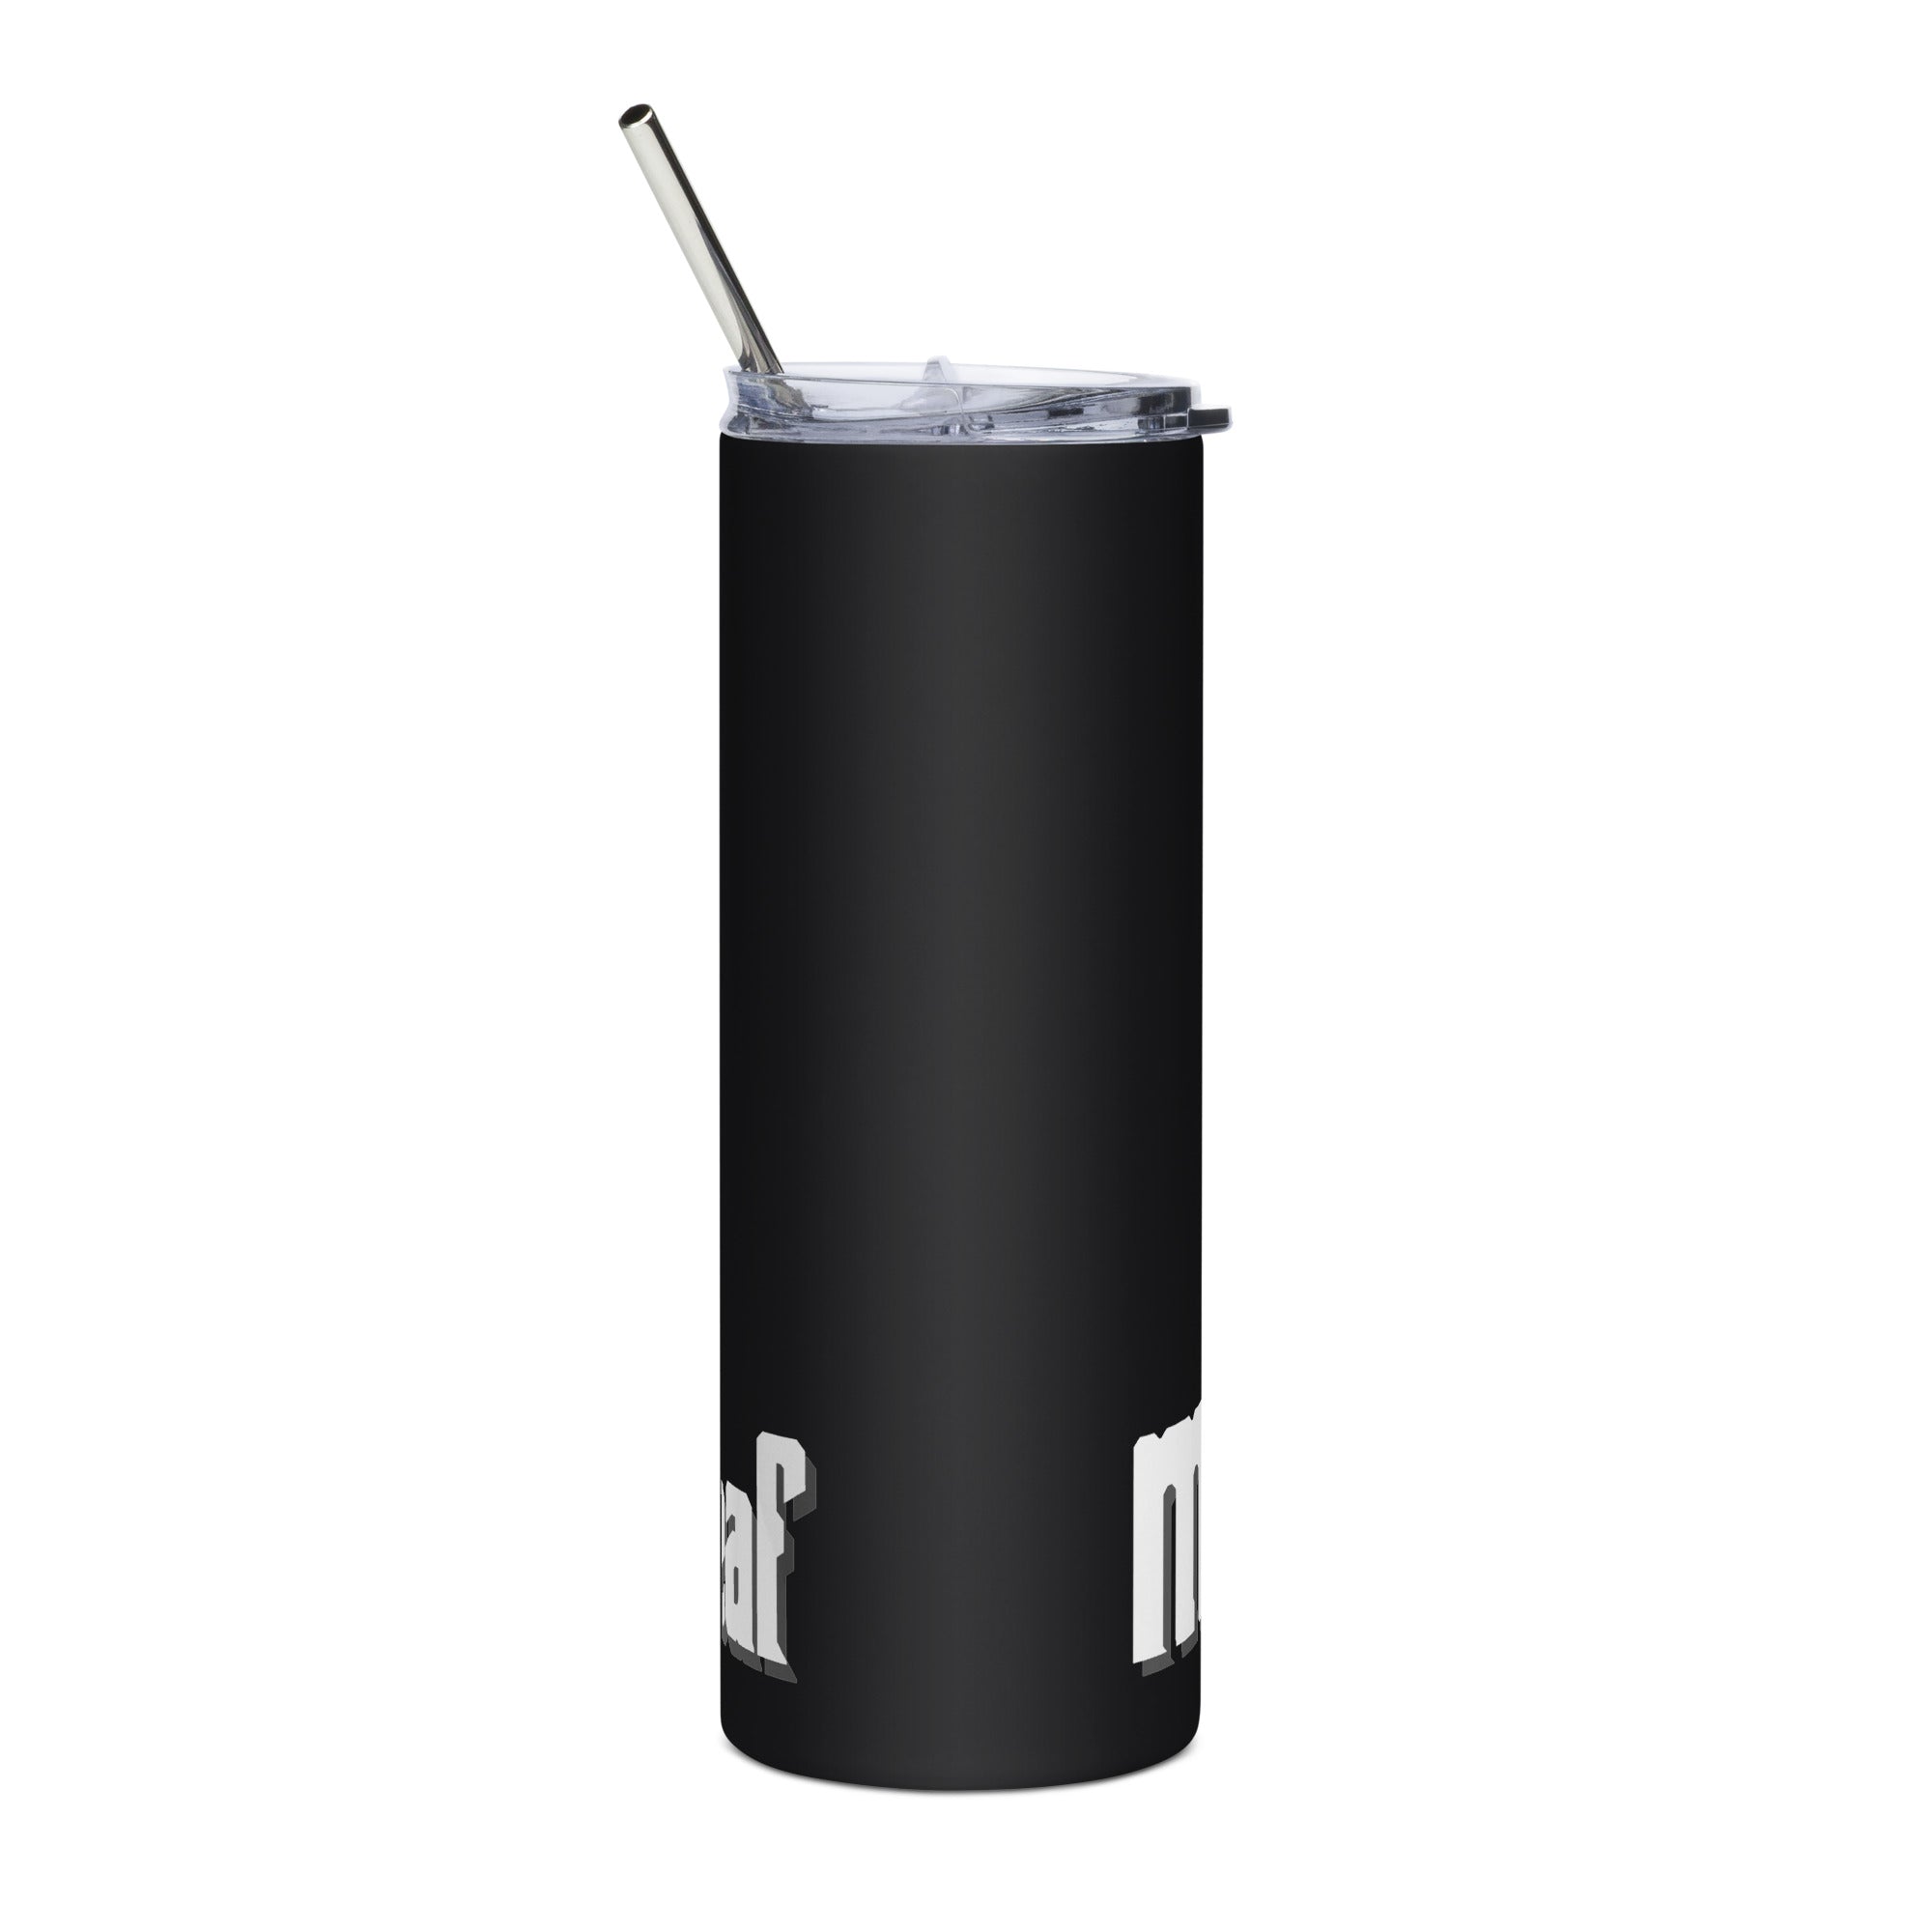 Men of the Leaf- Stainless steel tumbler